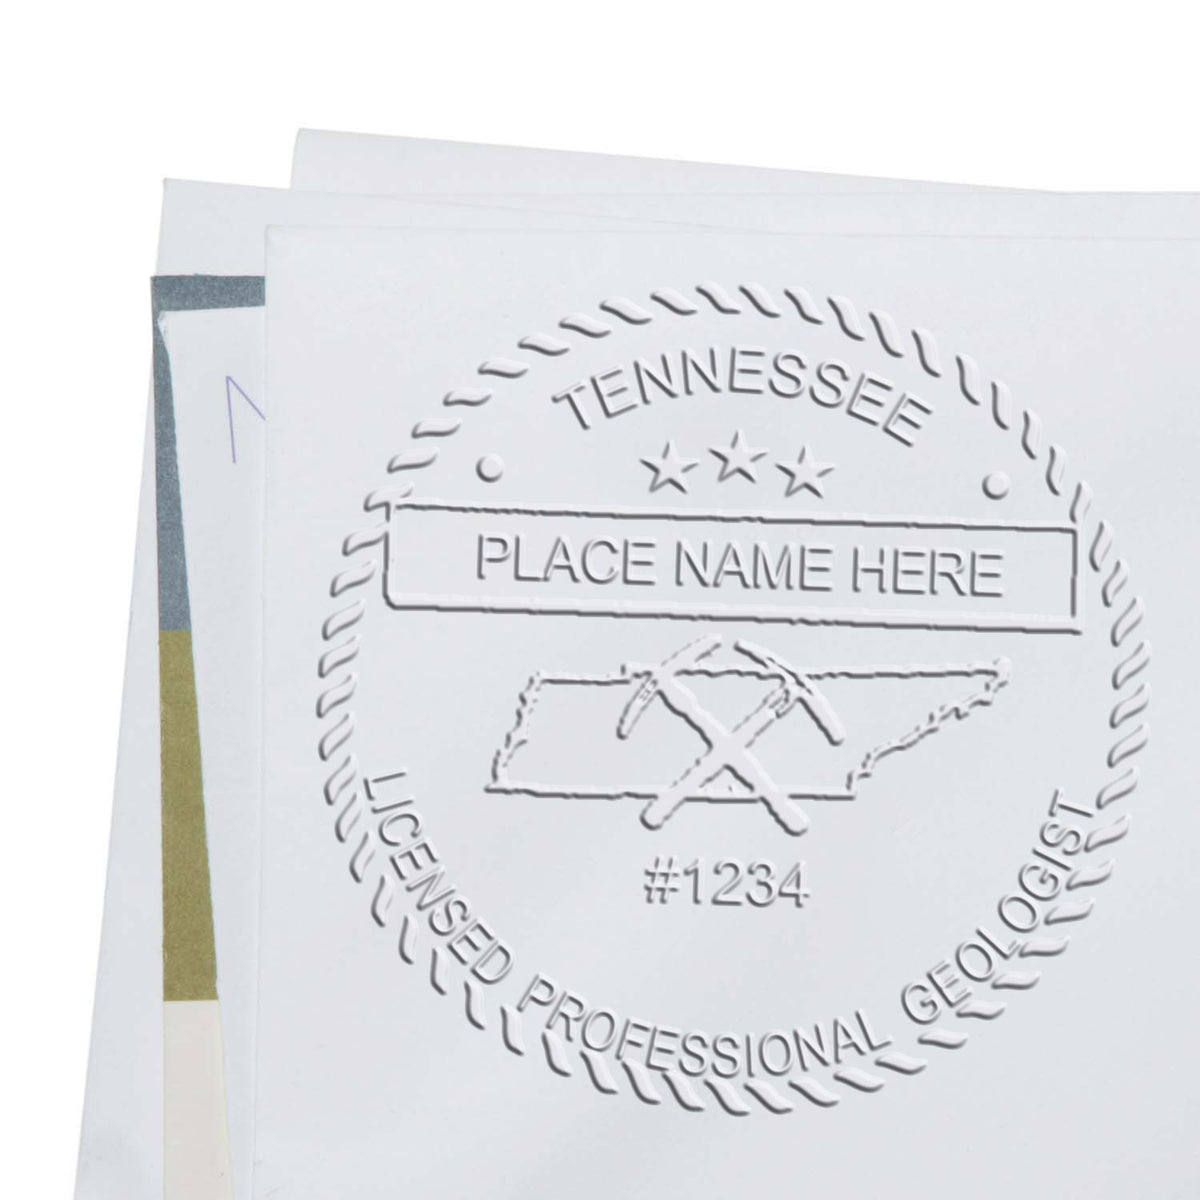 A photograph of the Soft Tennessee Professional Geologist Seal stamp impression reveals a vivid, professional image of the on paper.